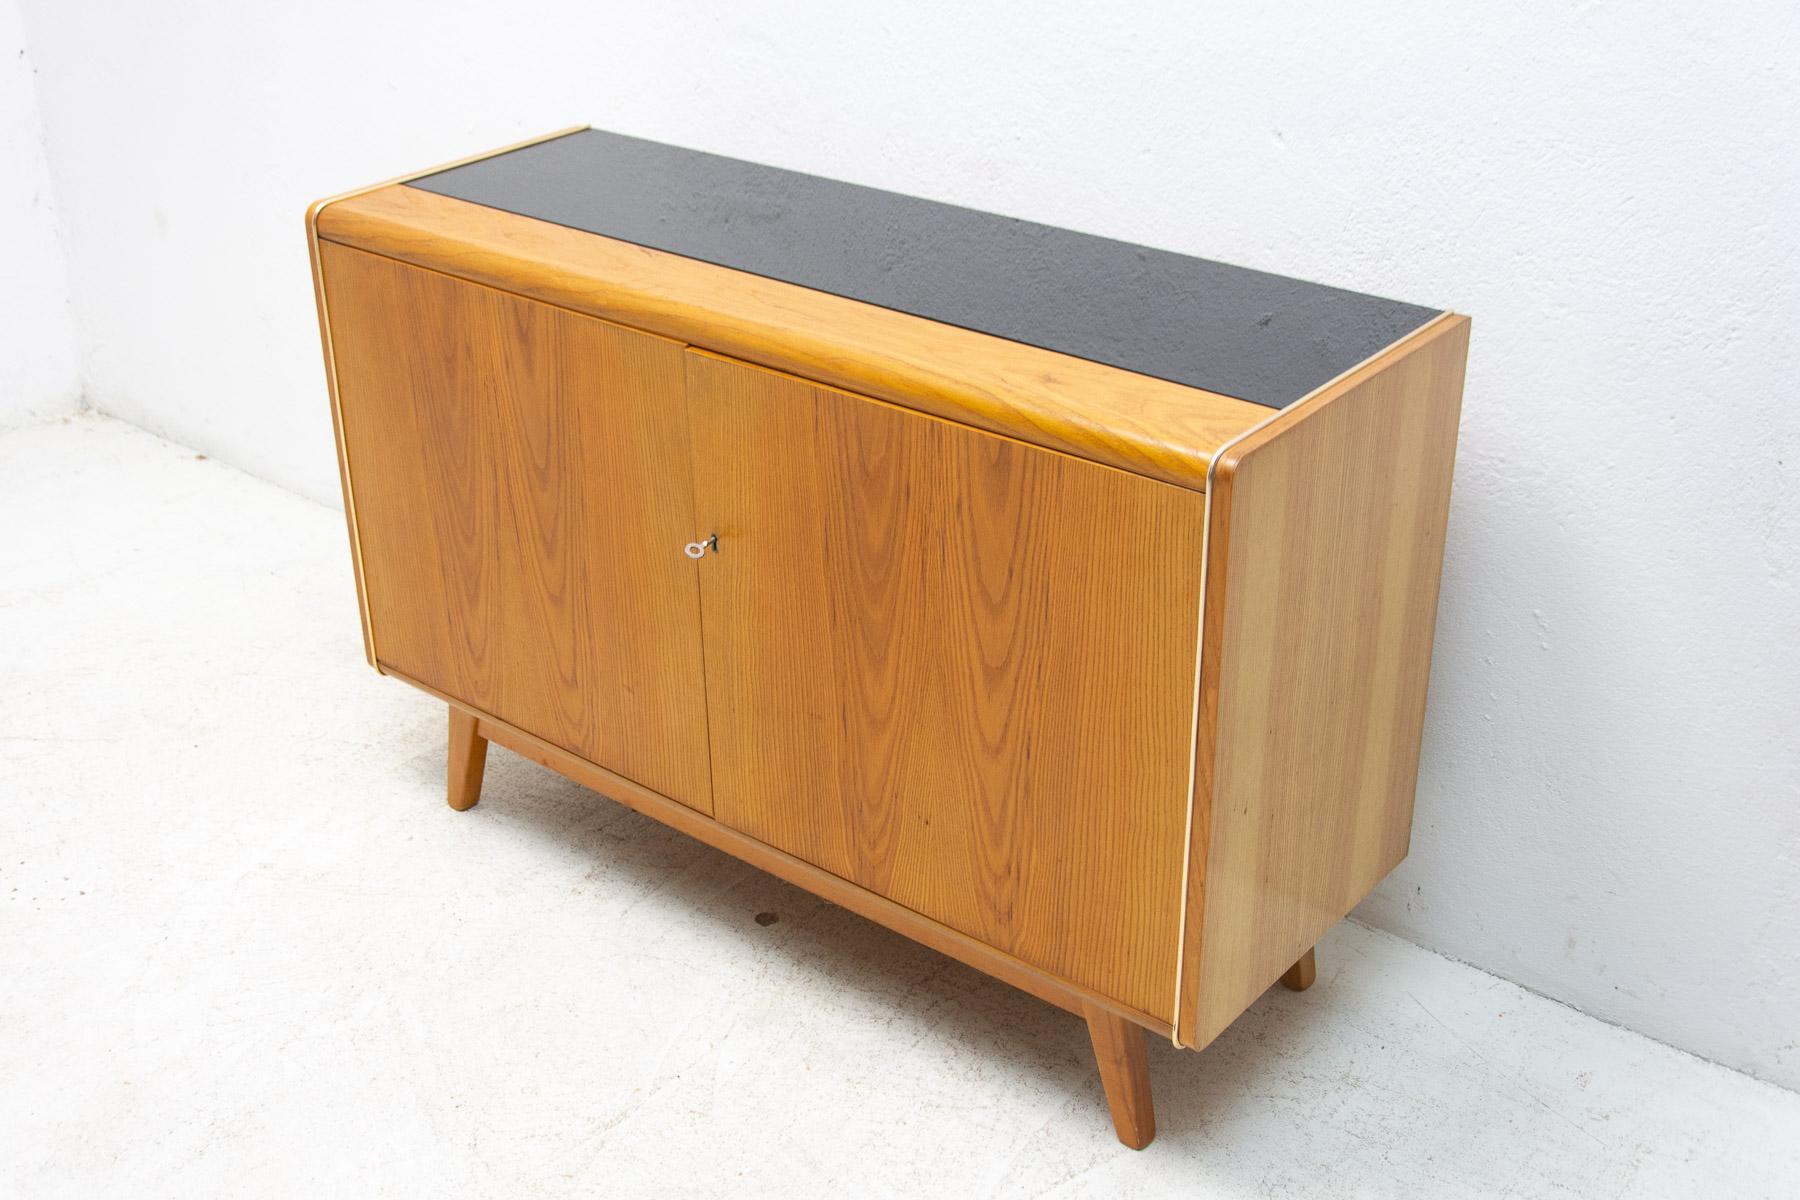 This mid century sideboard was designed by Hubert Nepožitek & Bohumil Landsman for Jitona company in the 1960´s. Beautiful walnut veneer. Material: walnut, mahogany, plywood, opaxite glass on the top. In good Vintage condition.

Measures: Height: